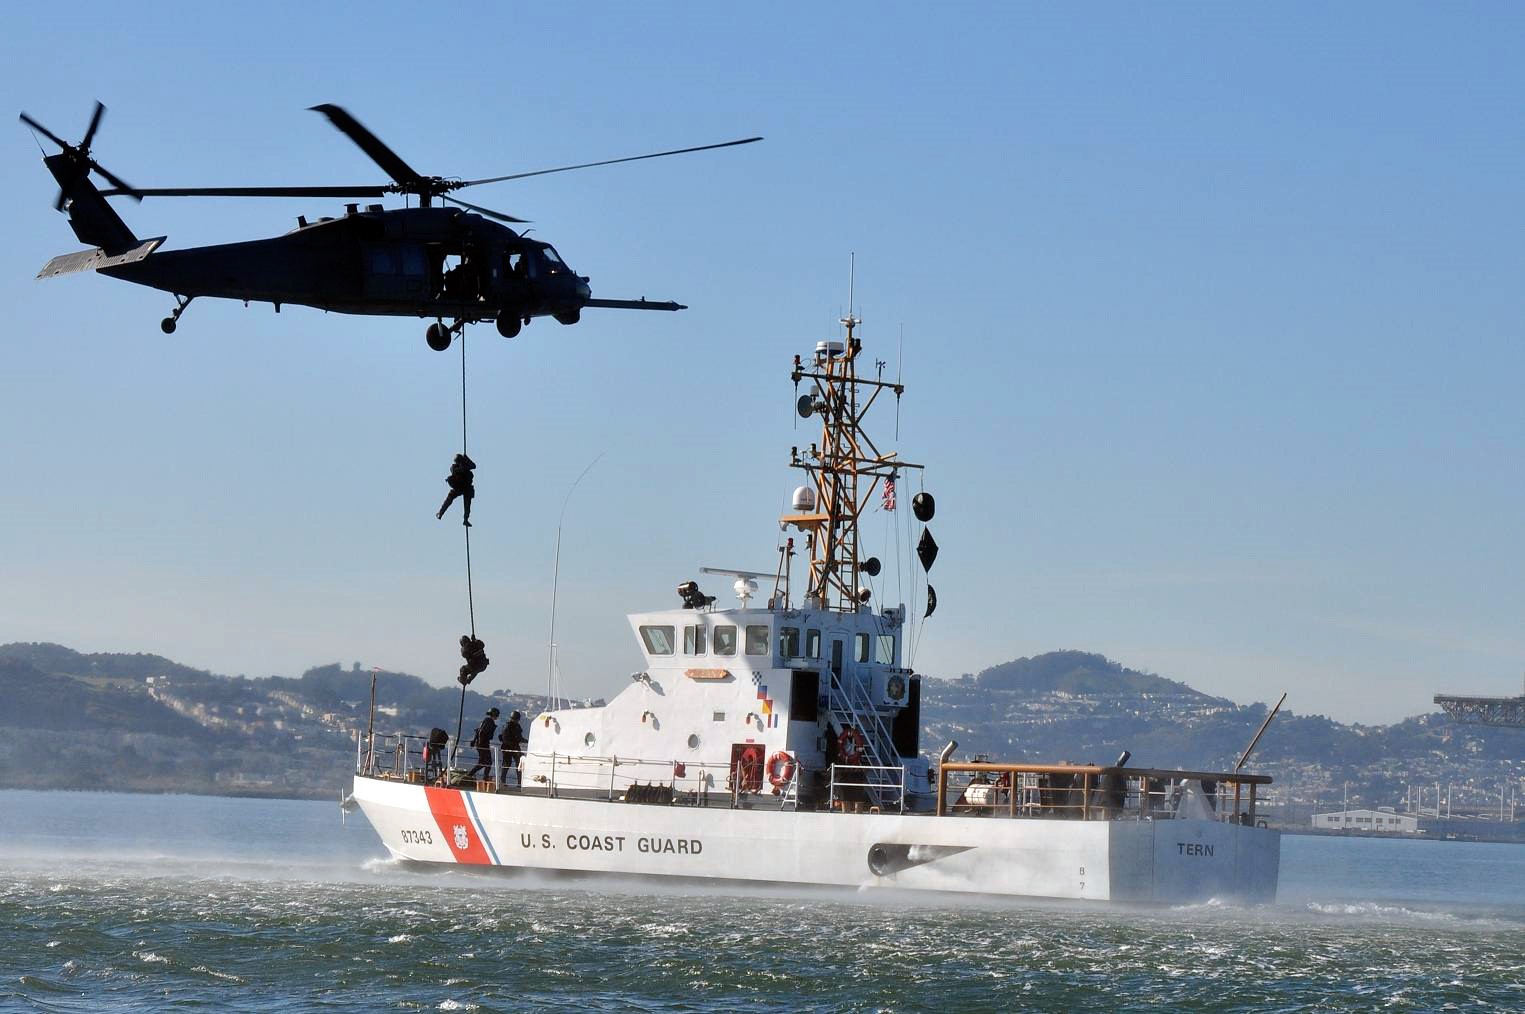 A rescue helicopter hovers above a white ship with U. S. Coast Guard written on its side. 2 people repel down a cable from the helicopter to the ship.